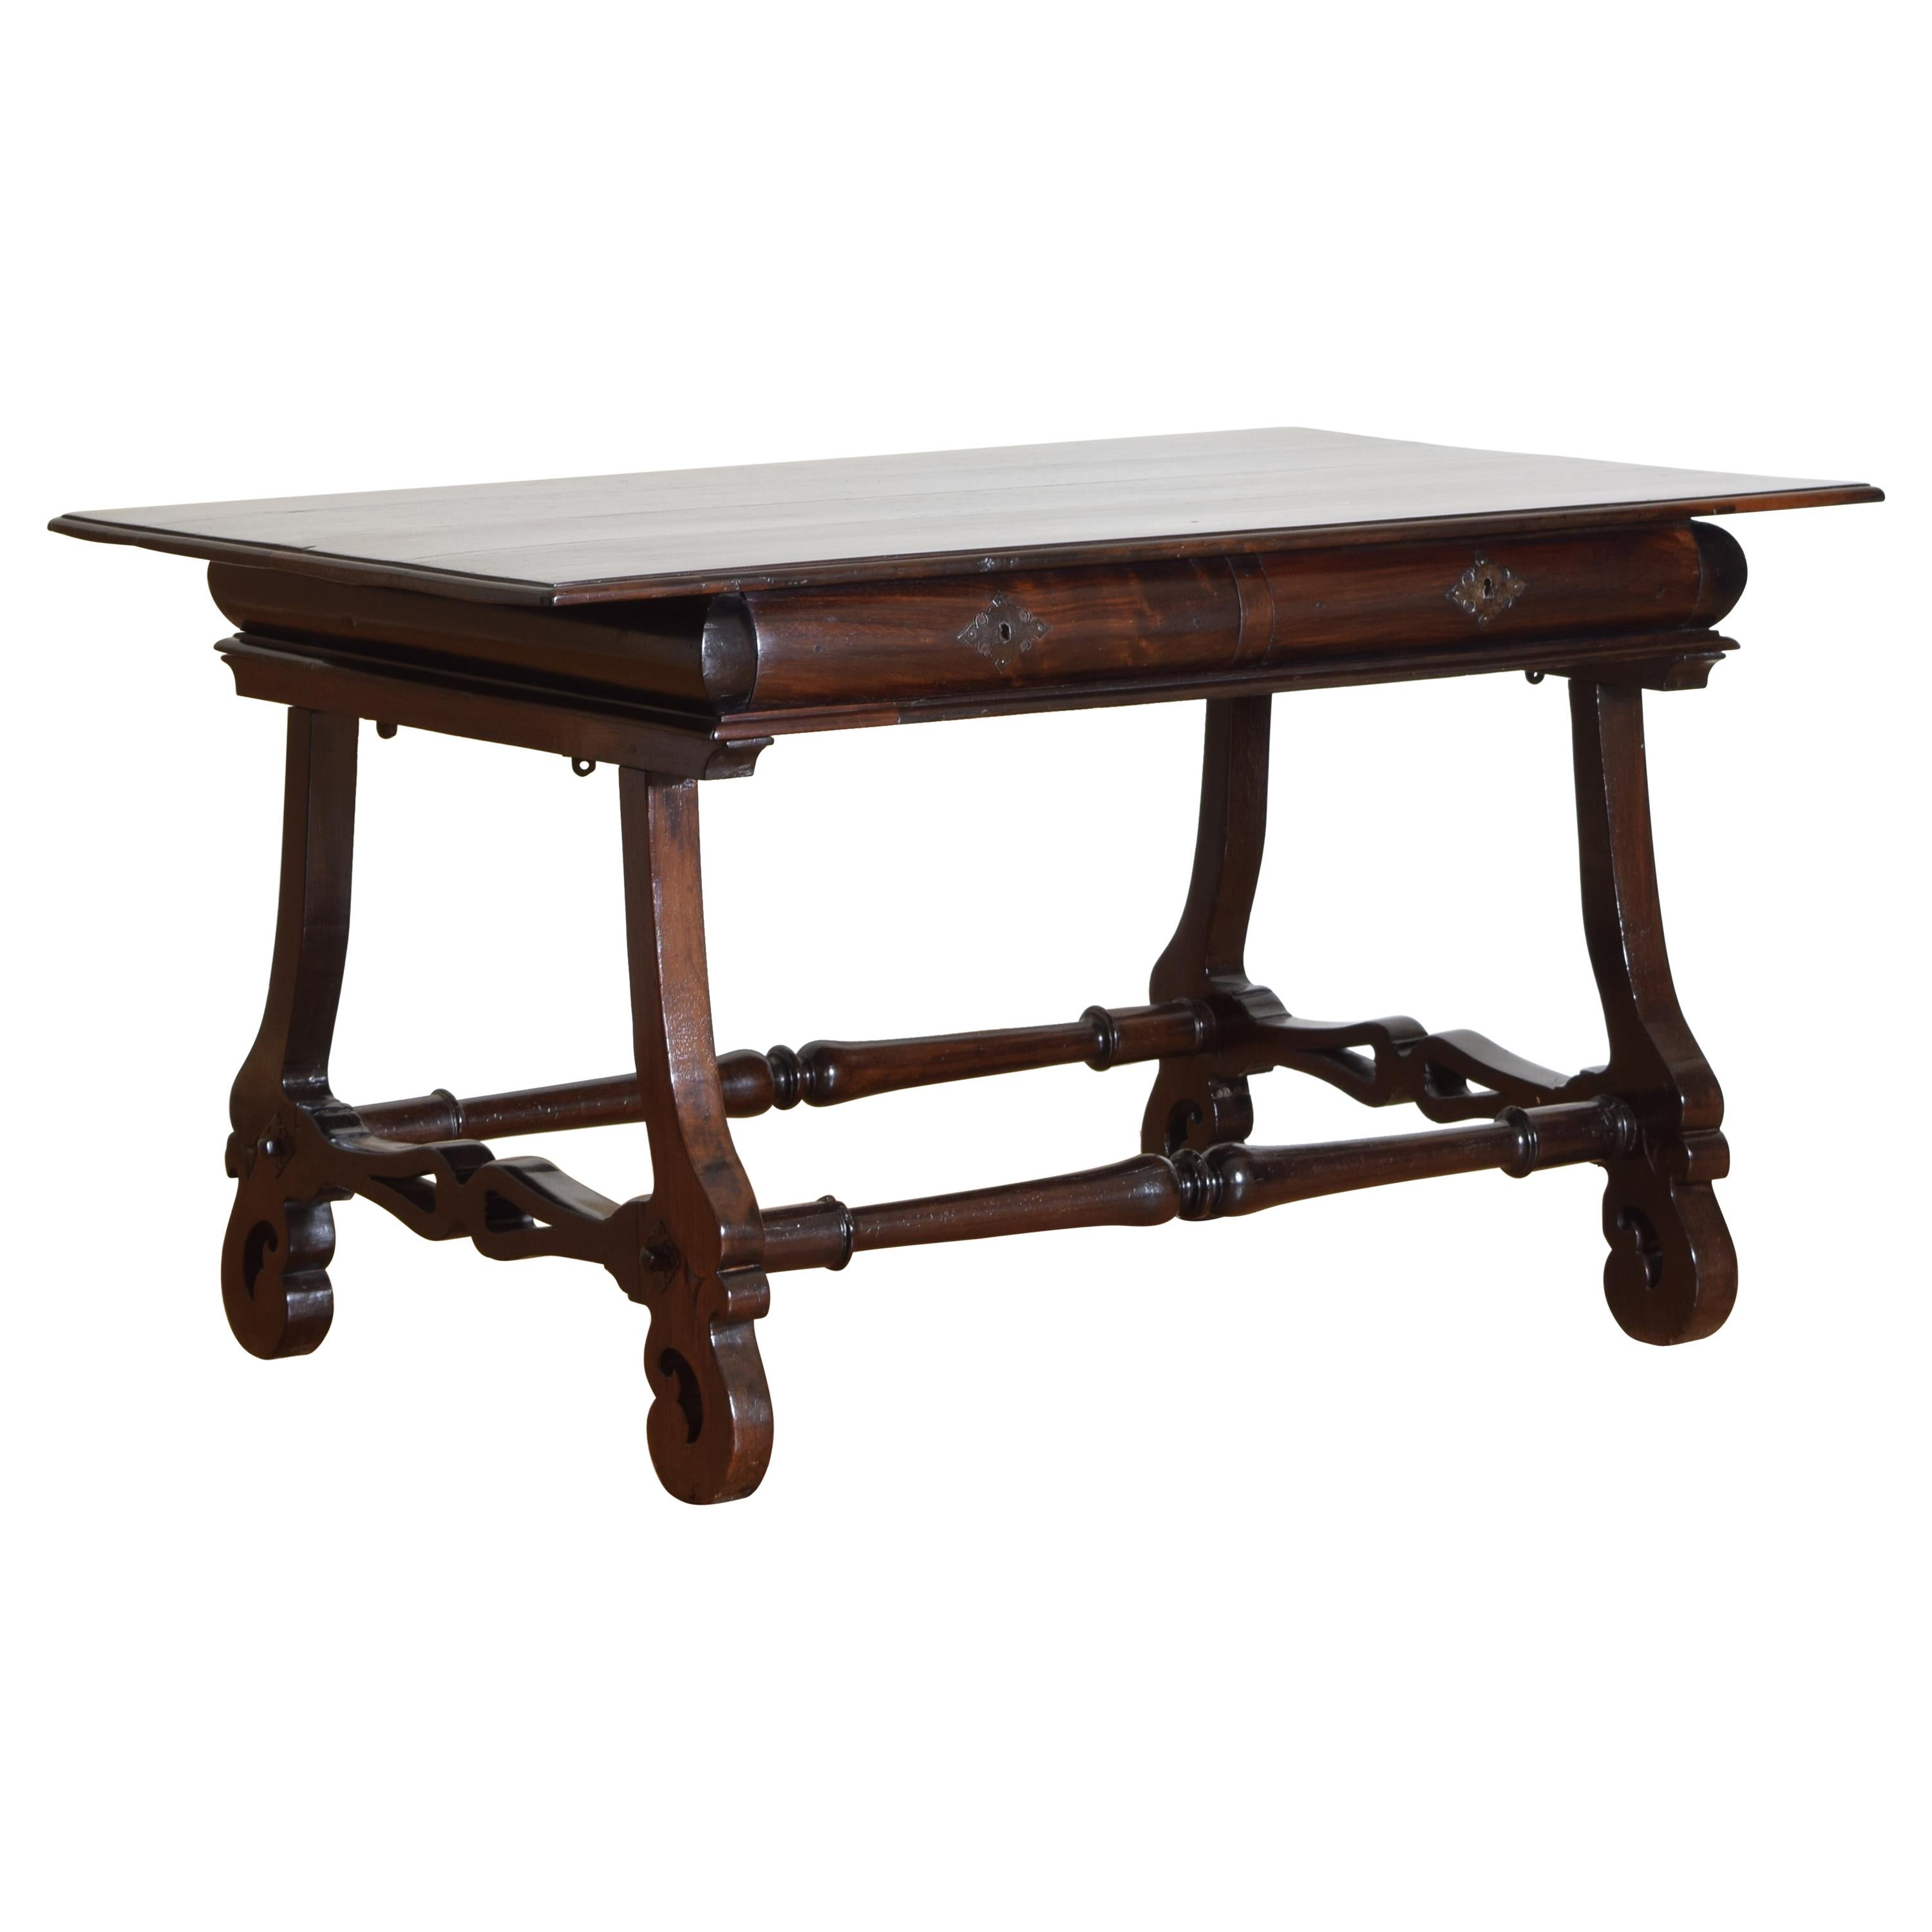 Portuguese Late Baroque Rosewood 2-Drawer Center Table or Desk, 18th Century For Sale